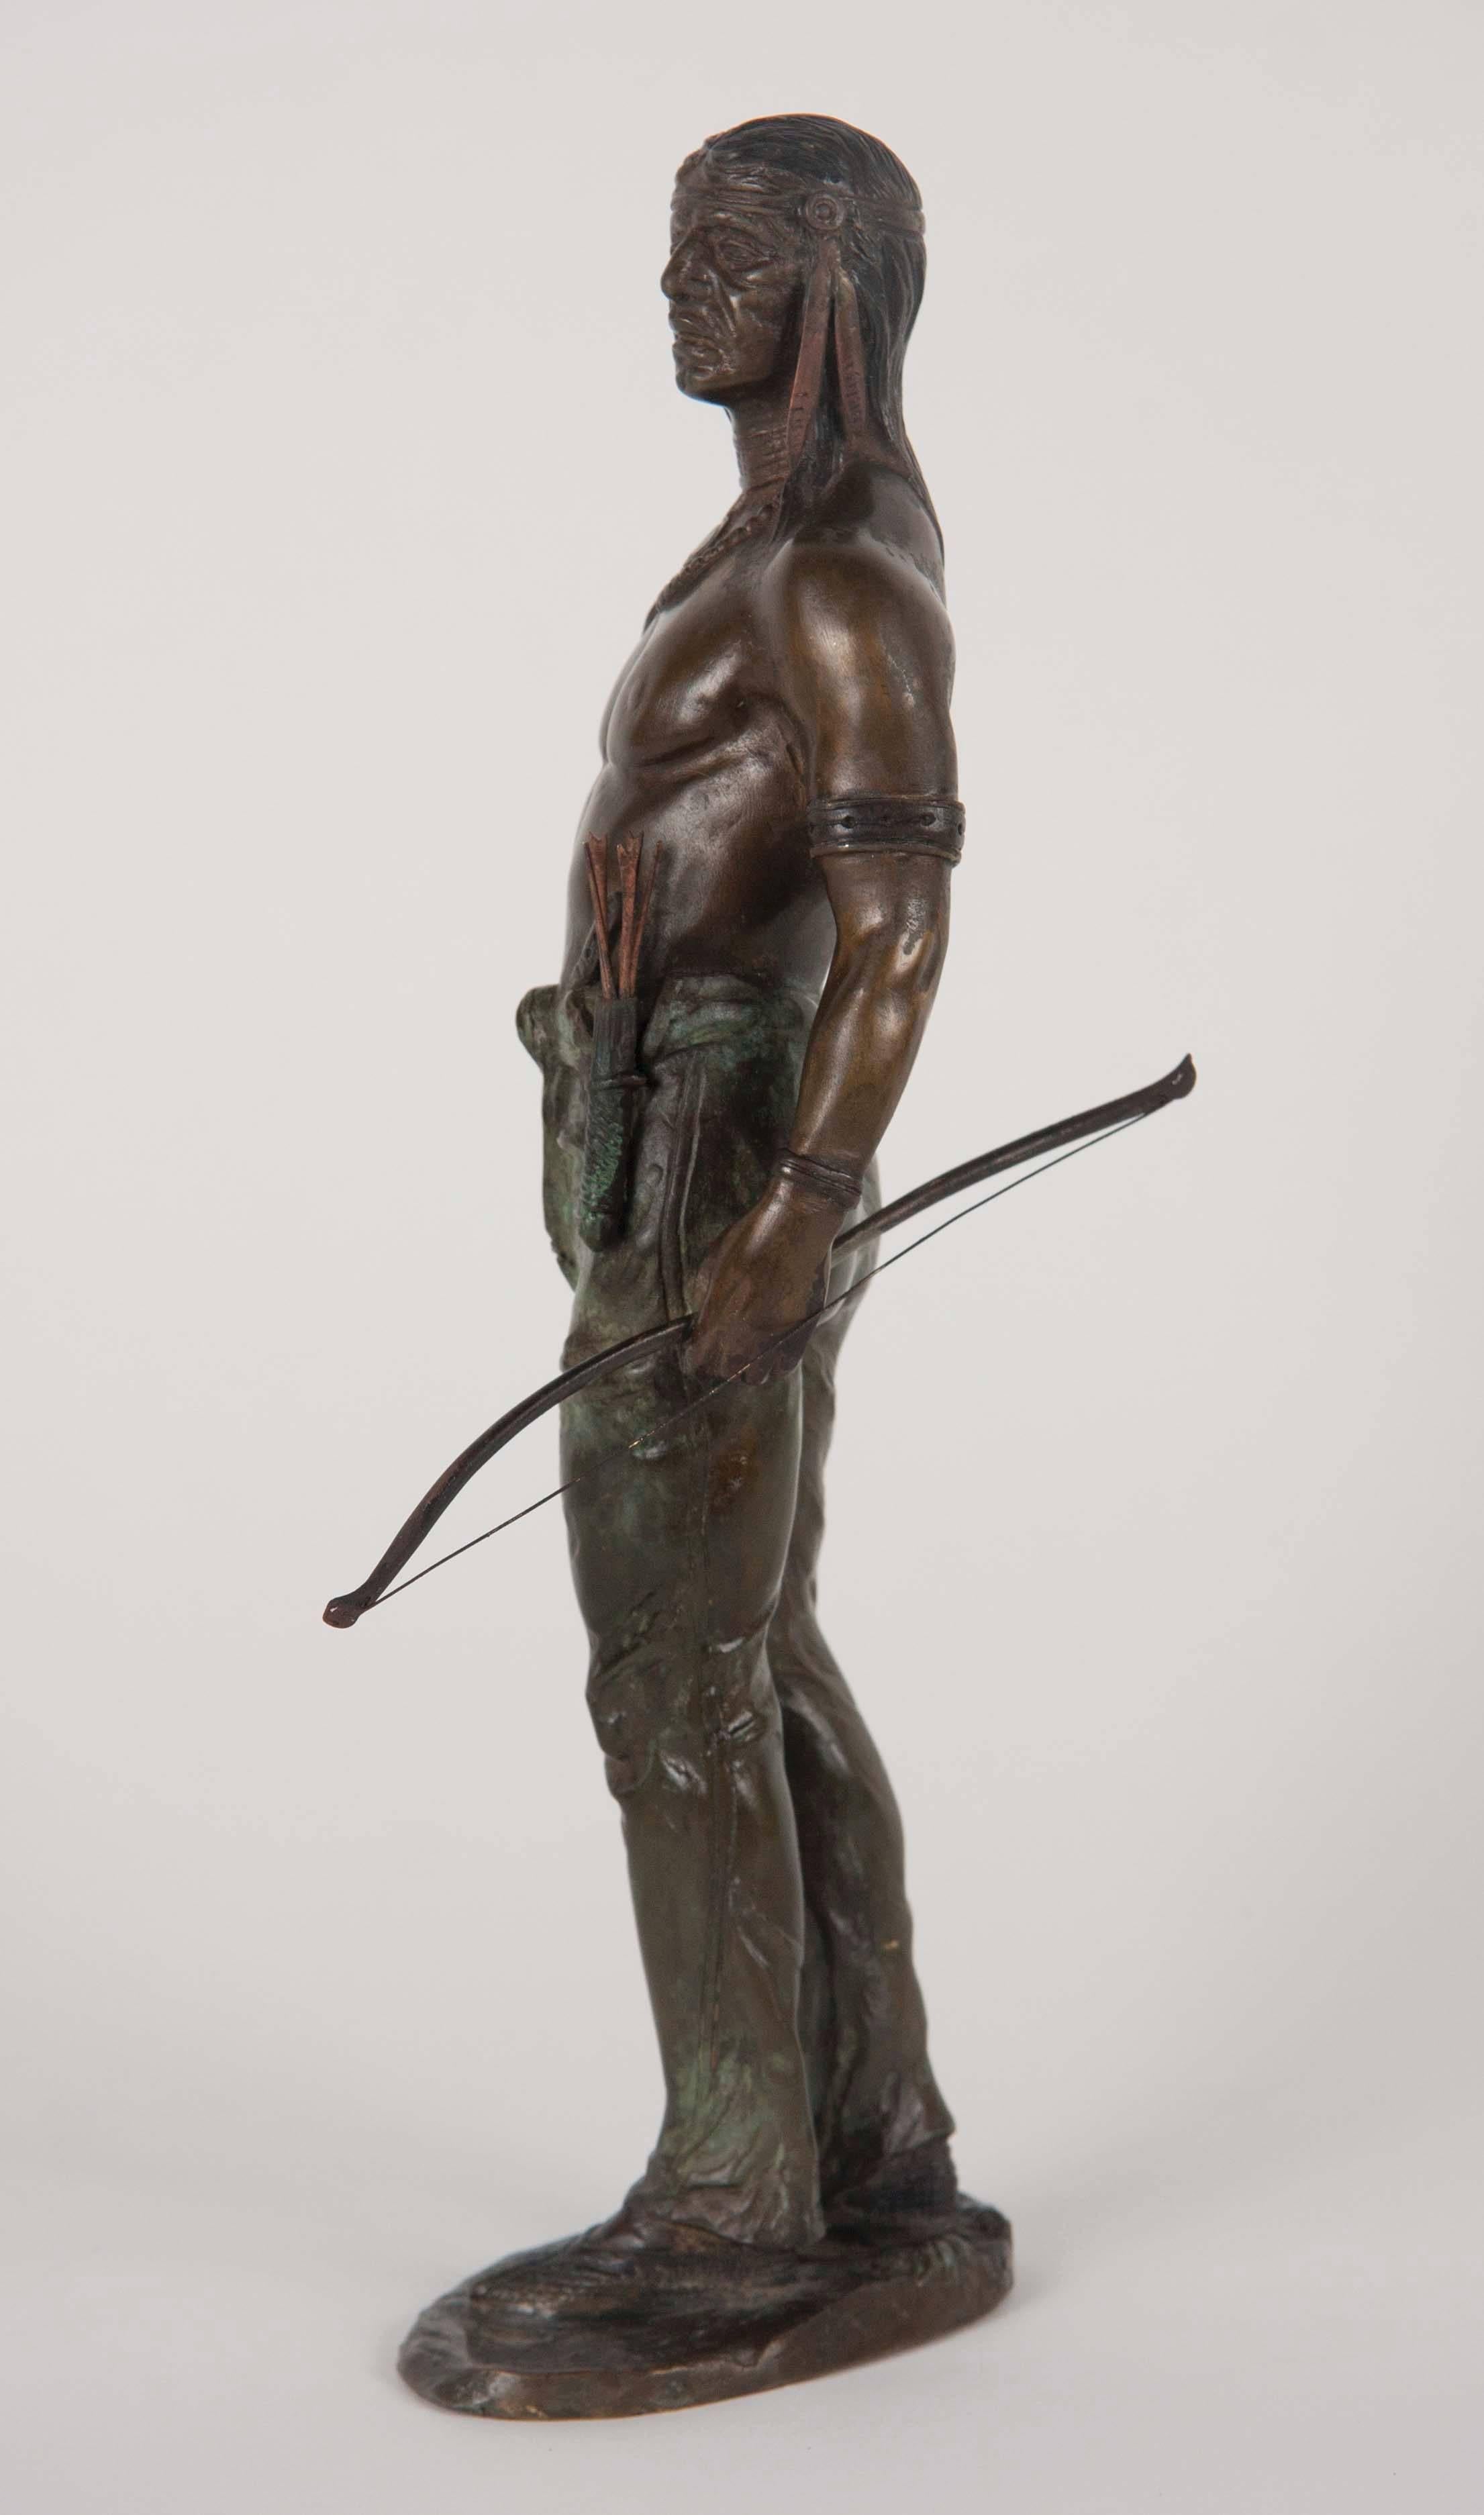 Carl Kauba bronze of standing Indian brave with bows and arrows; 
signed C. Kauba.